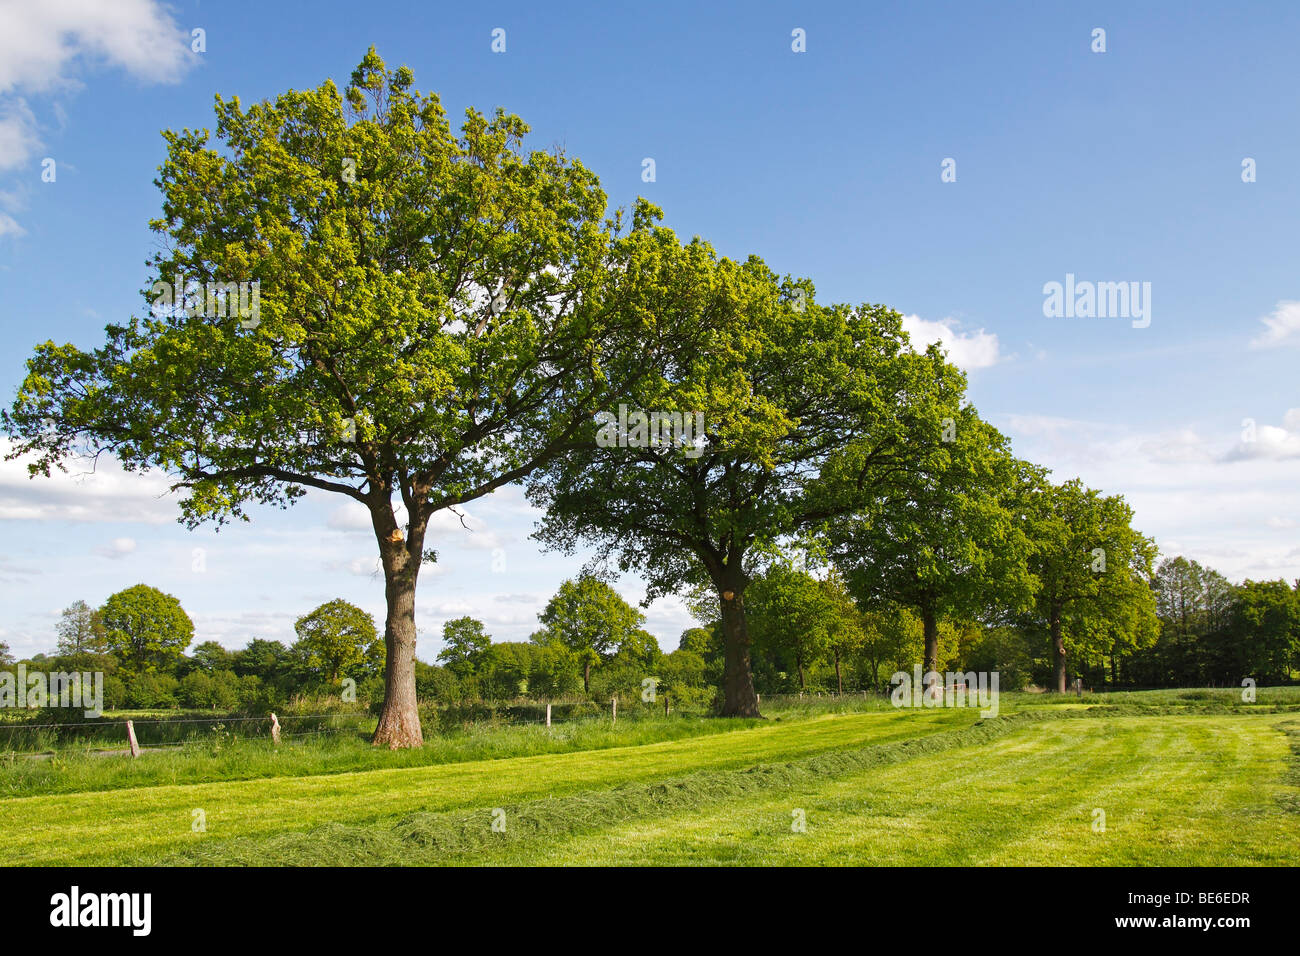 Landscape in spring with english oaks, pedunculate oak (Quercus robur), fresh green foliage in may, Nature Reserve Oberalsterni Stock Photo